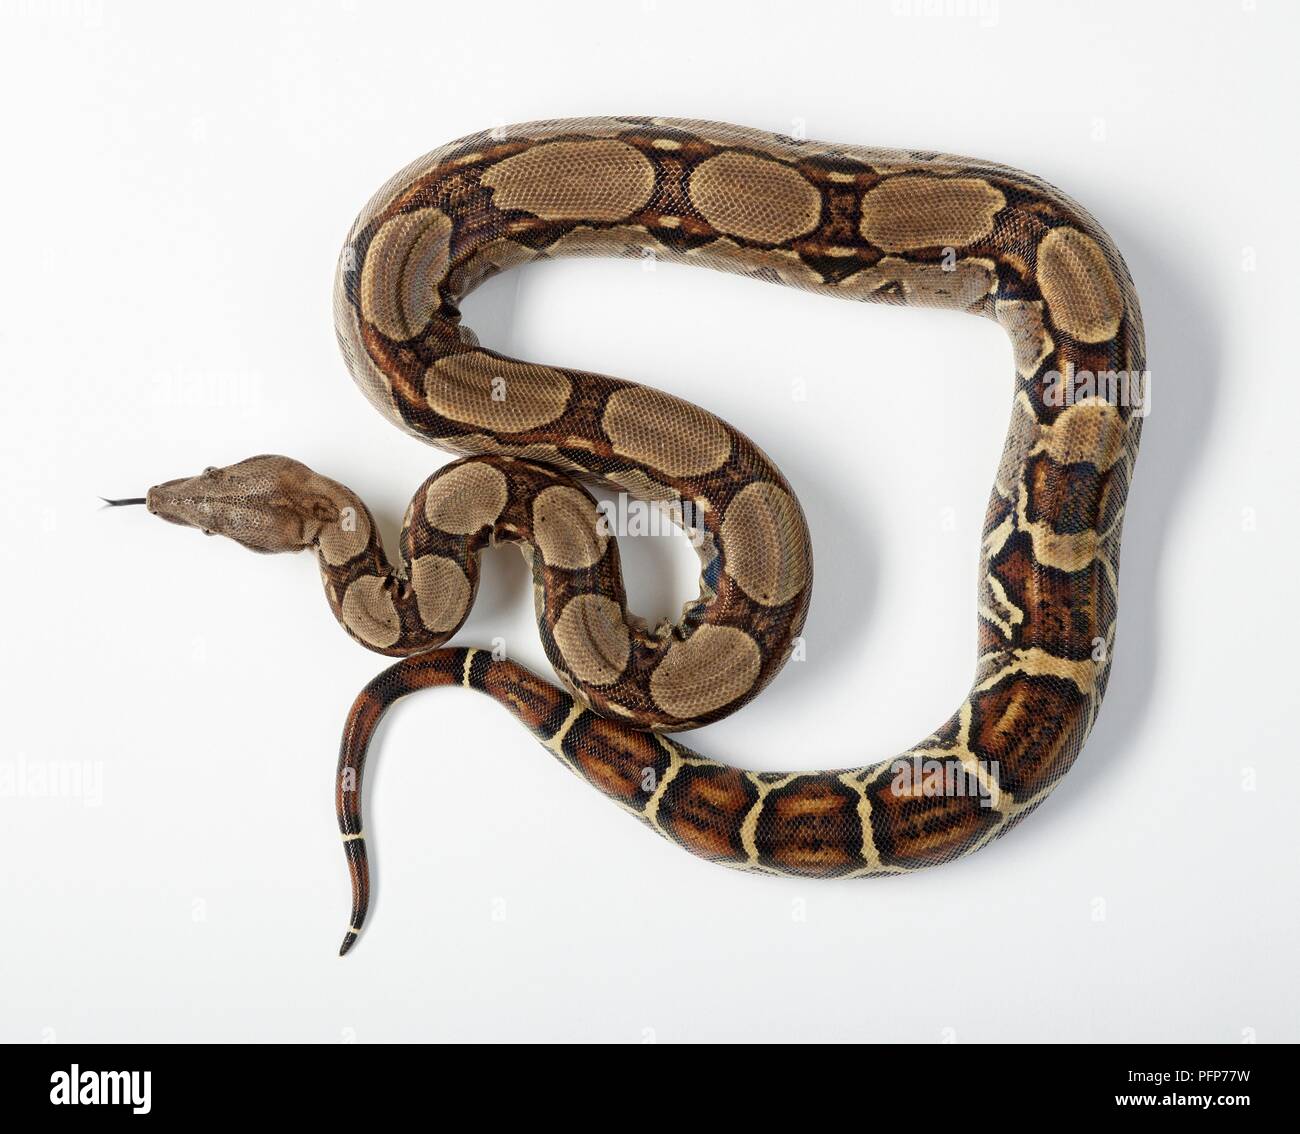 Common Boa (Boa constrictor imperator) snake showing natural pattern on skin, sticking tongue out Stock Photo